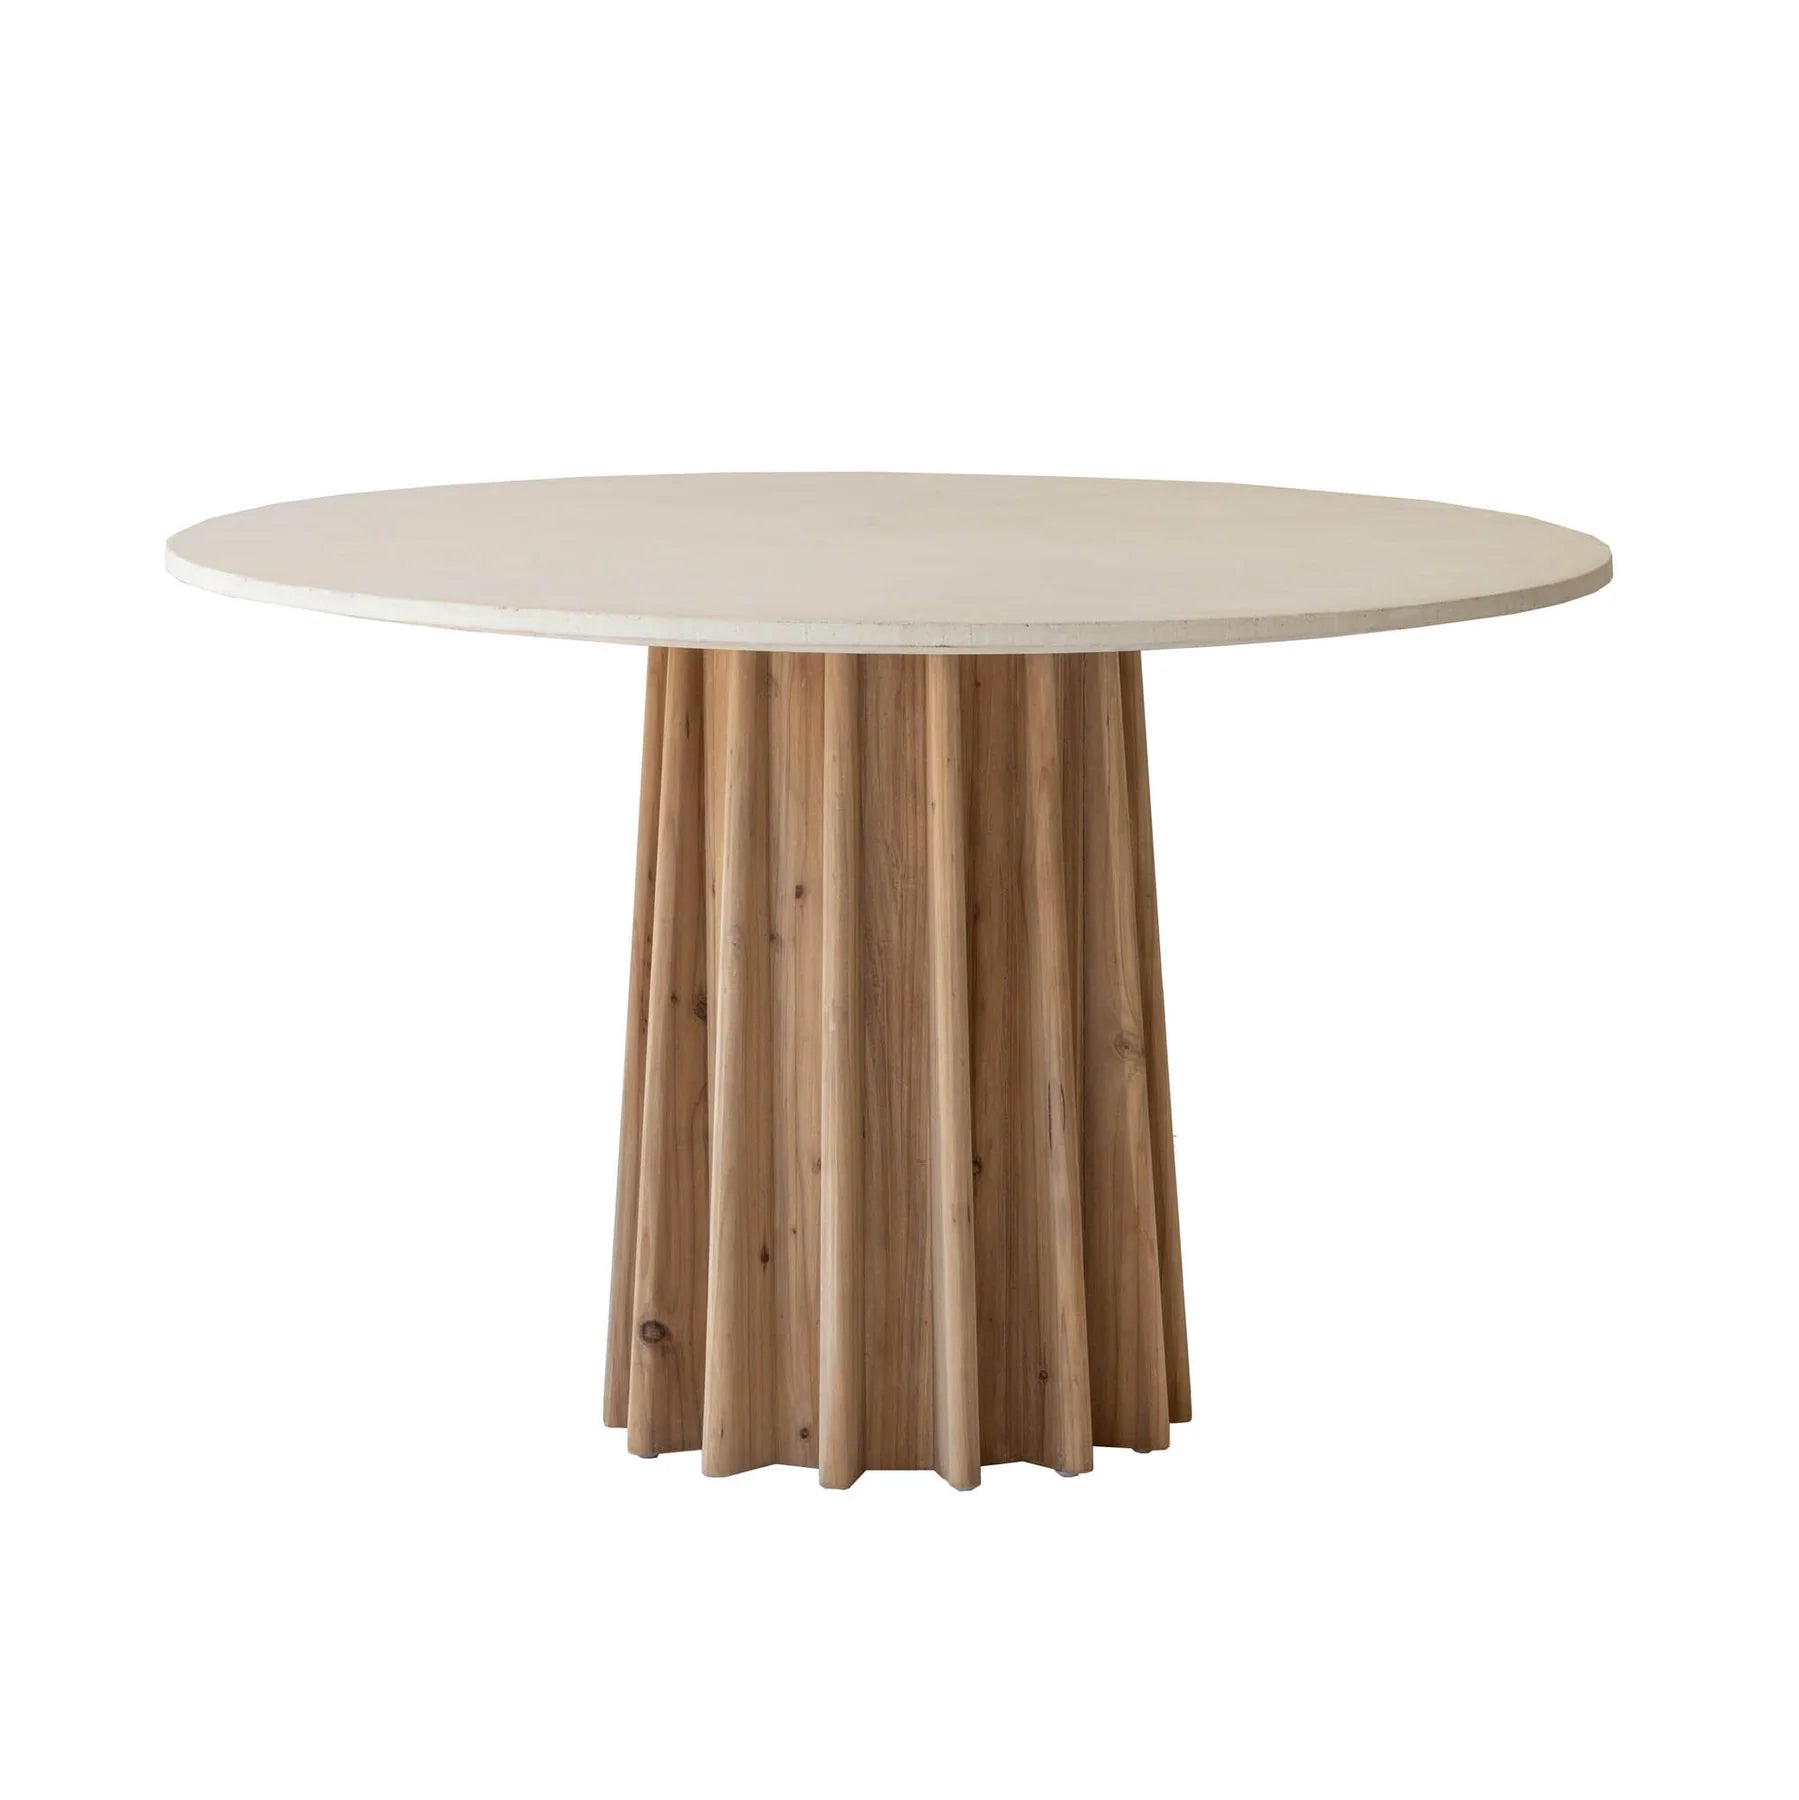 Picture of Sculpture Dining Table - White Concrete Wash